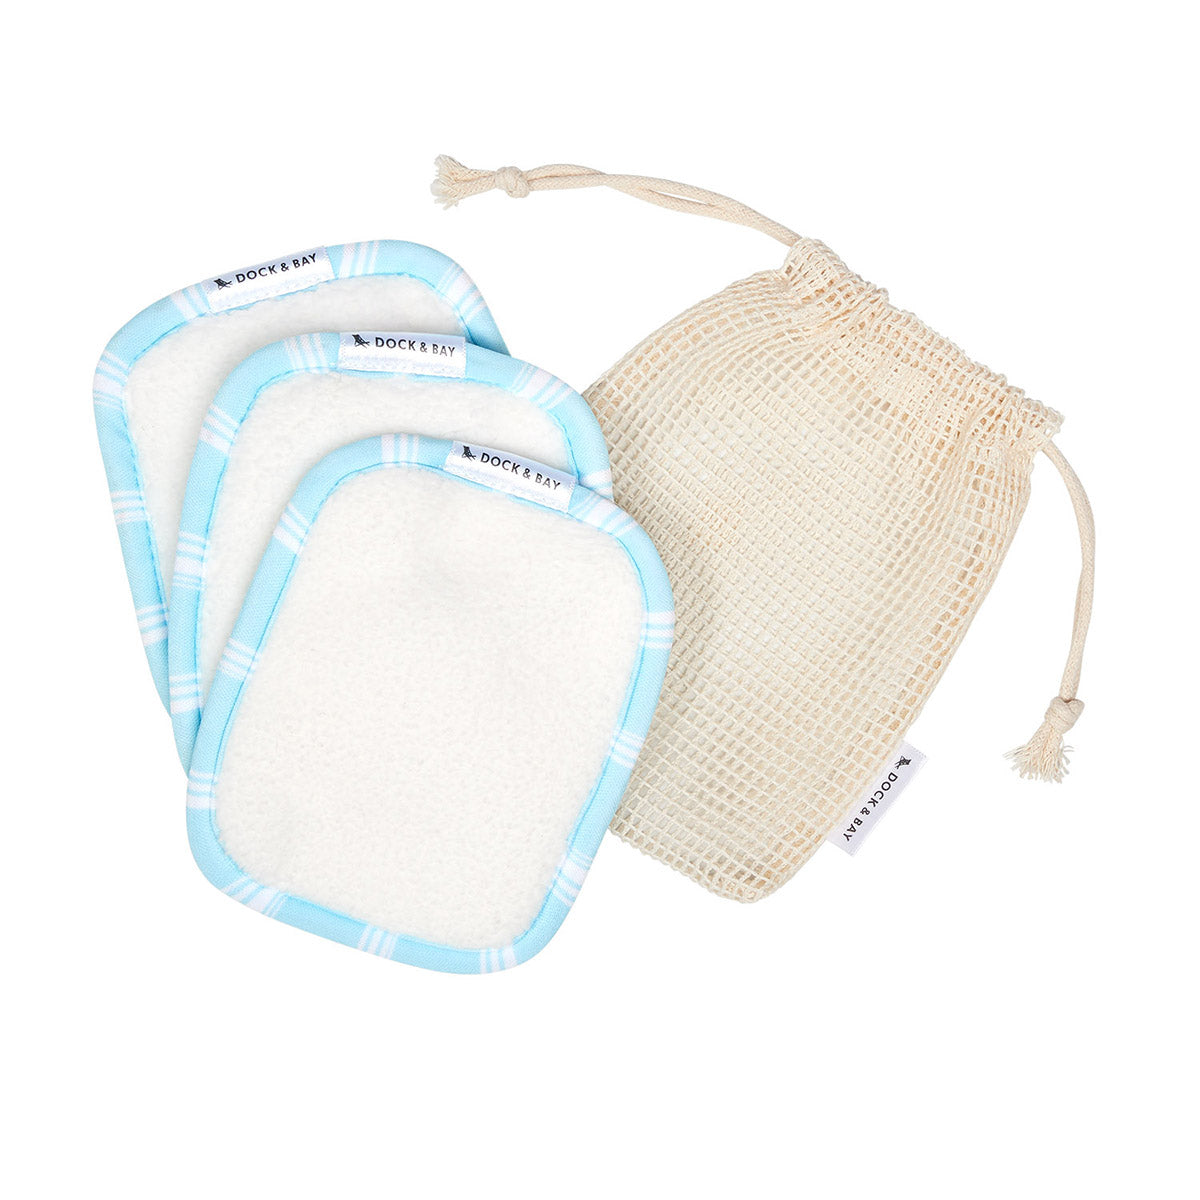 Home Reusable Makeup Wipes (pk of 3) Chamomile Blue